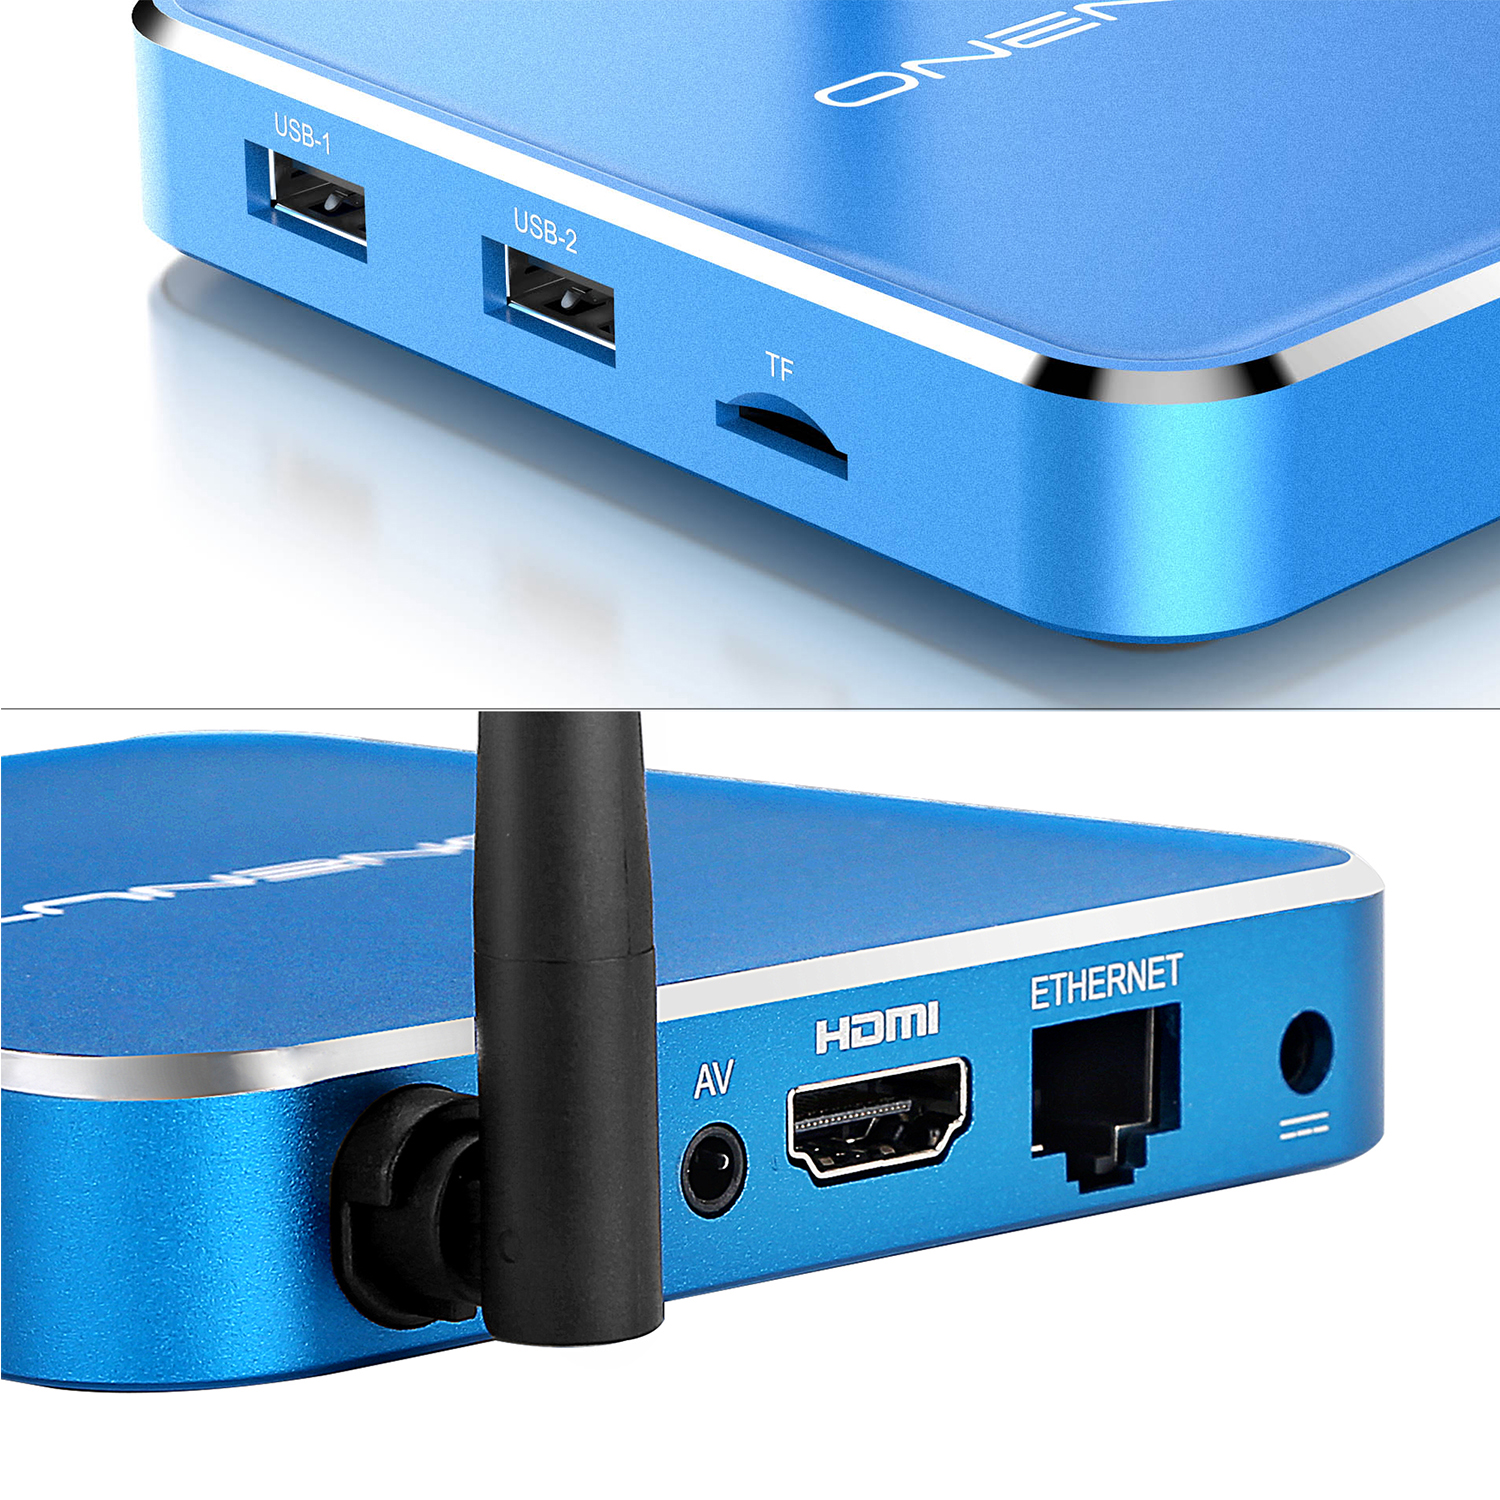 2-in-1 Octa Core Streaming Media Player & Game Android TV Box مع Android 6.0 Marshmallow 2G DDR3 16G eMMC Dual-AC AC WIFI يدعم KODI YouTube Netflix Facebook وغيرها الكثير - Onenuts Nut 1 Blue